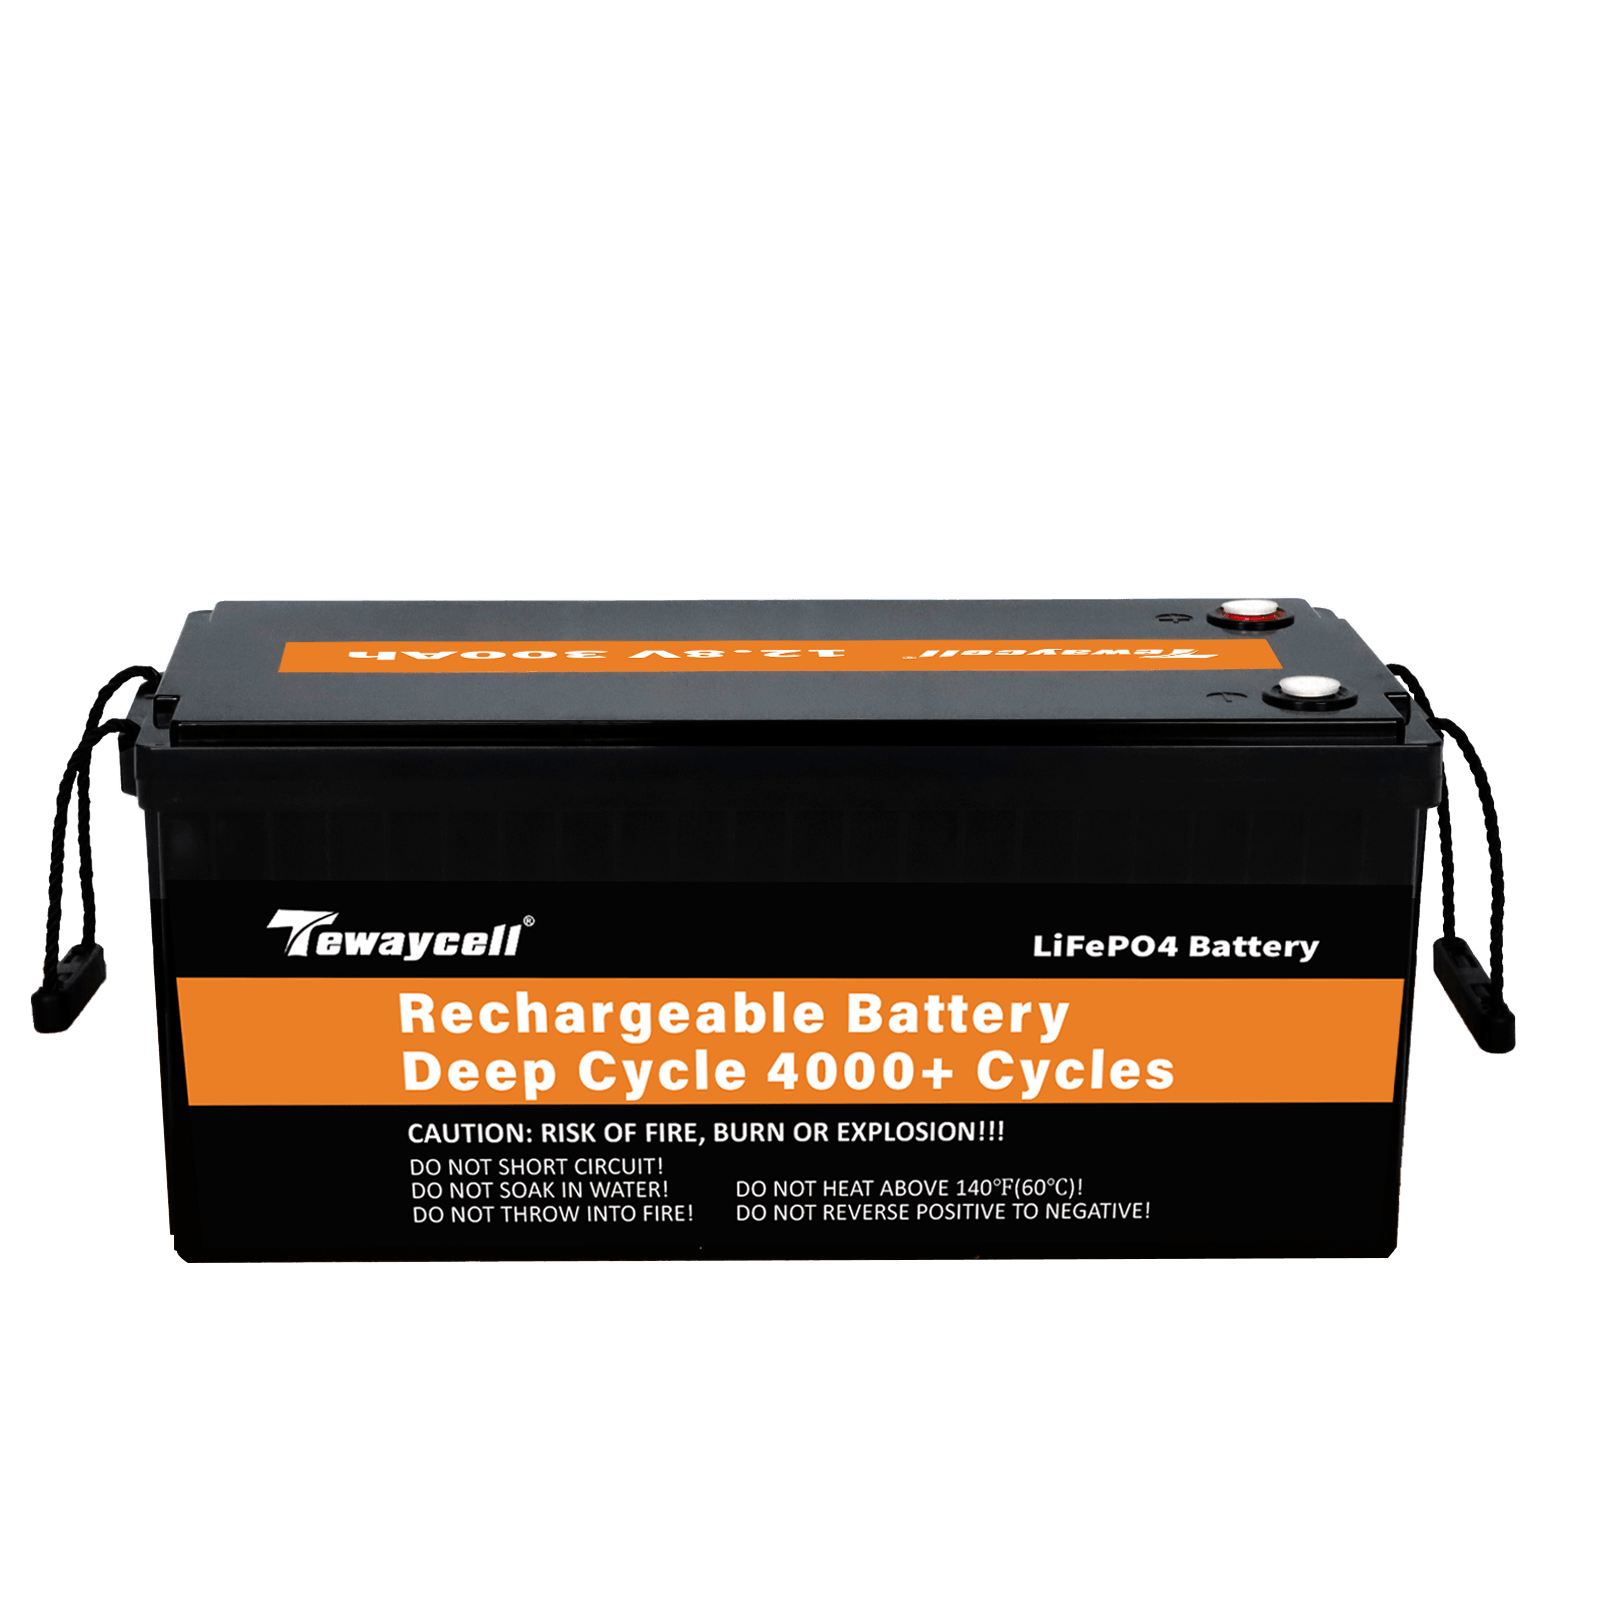 Temgot LiFePO4 Battery 12V 300Ah Lithium Battery - Built-in Bluetooth